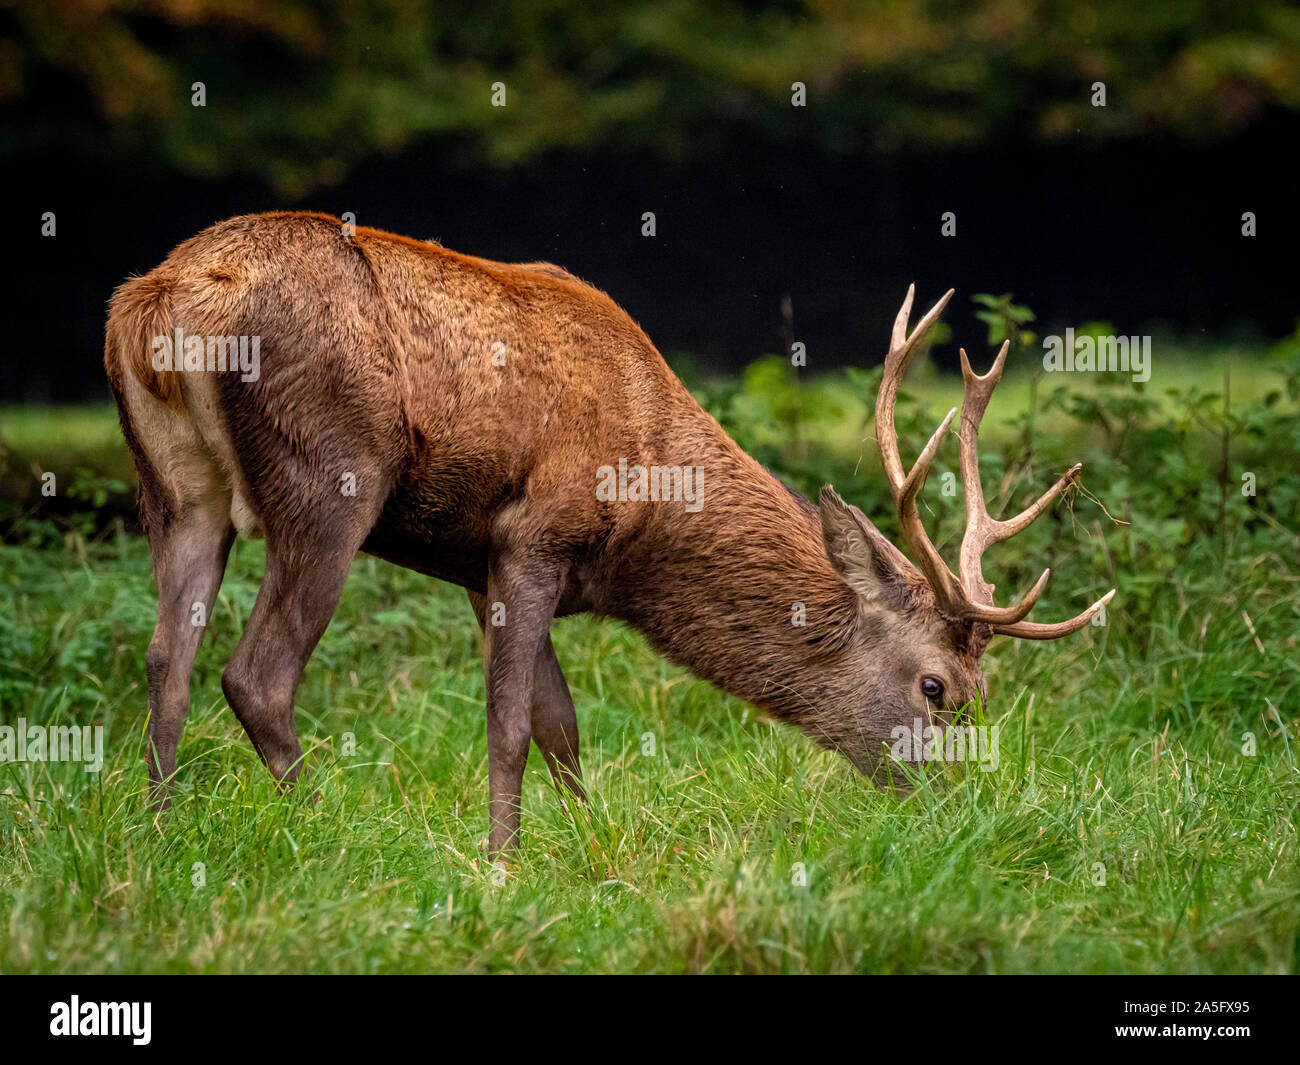 Red Deer Stag, Studley Royal Park, North Yorkshire, Regno Unito. Foto Stock